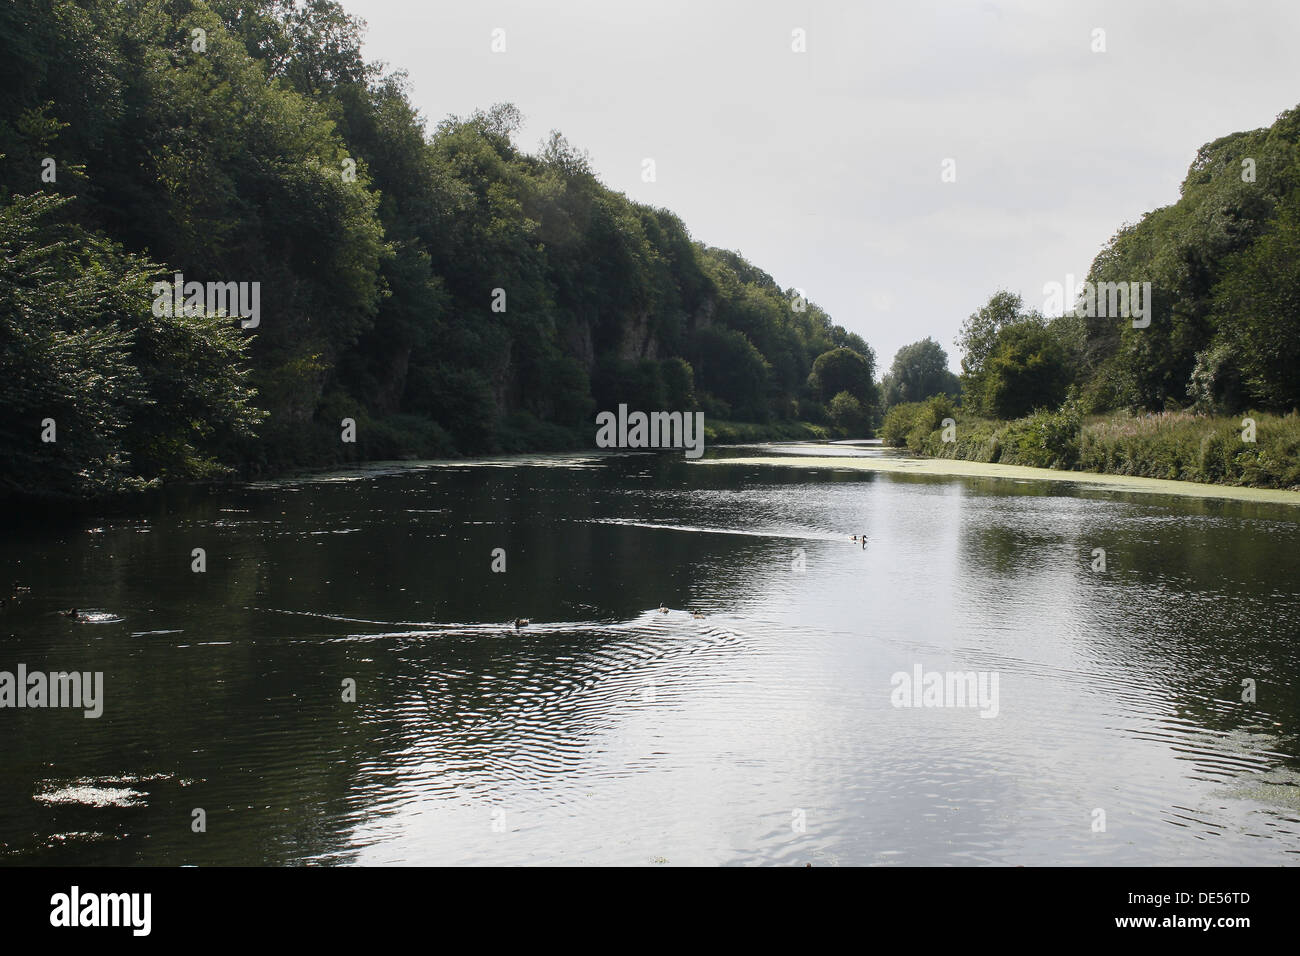 Wildfowl lago, Creswell Crags, Welbeck, Worksop, Nottinghamshire, Regno Unito Foto Stock